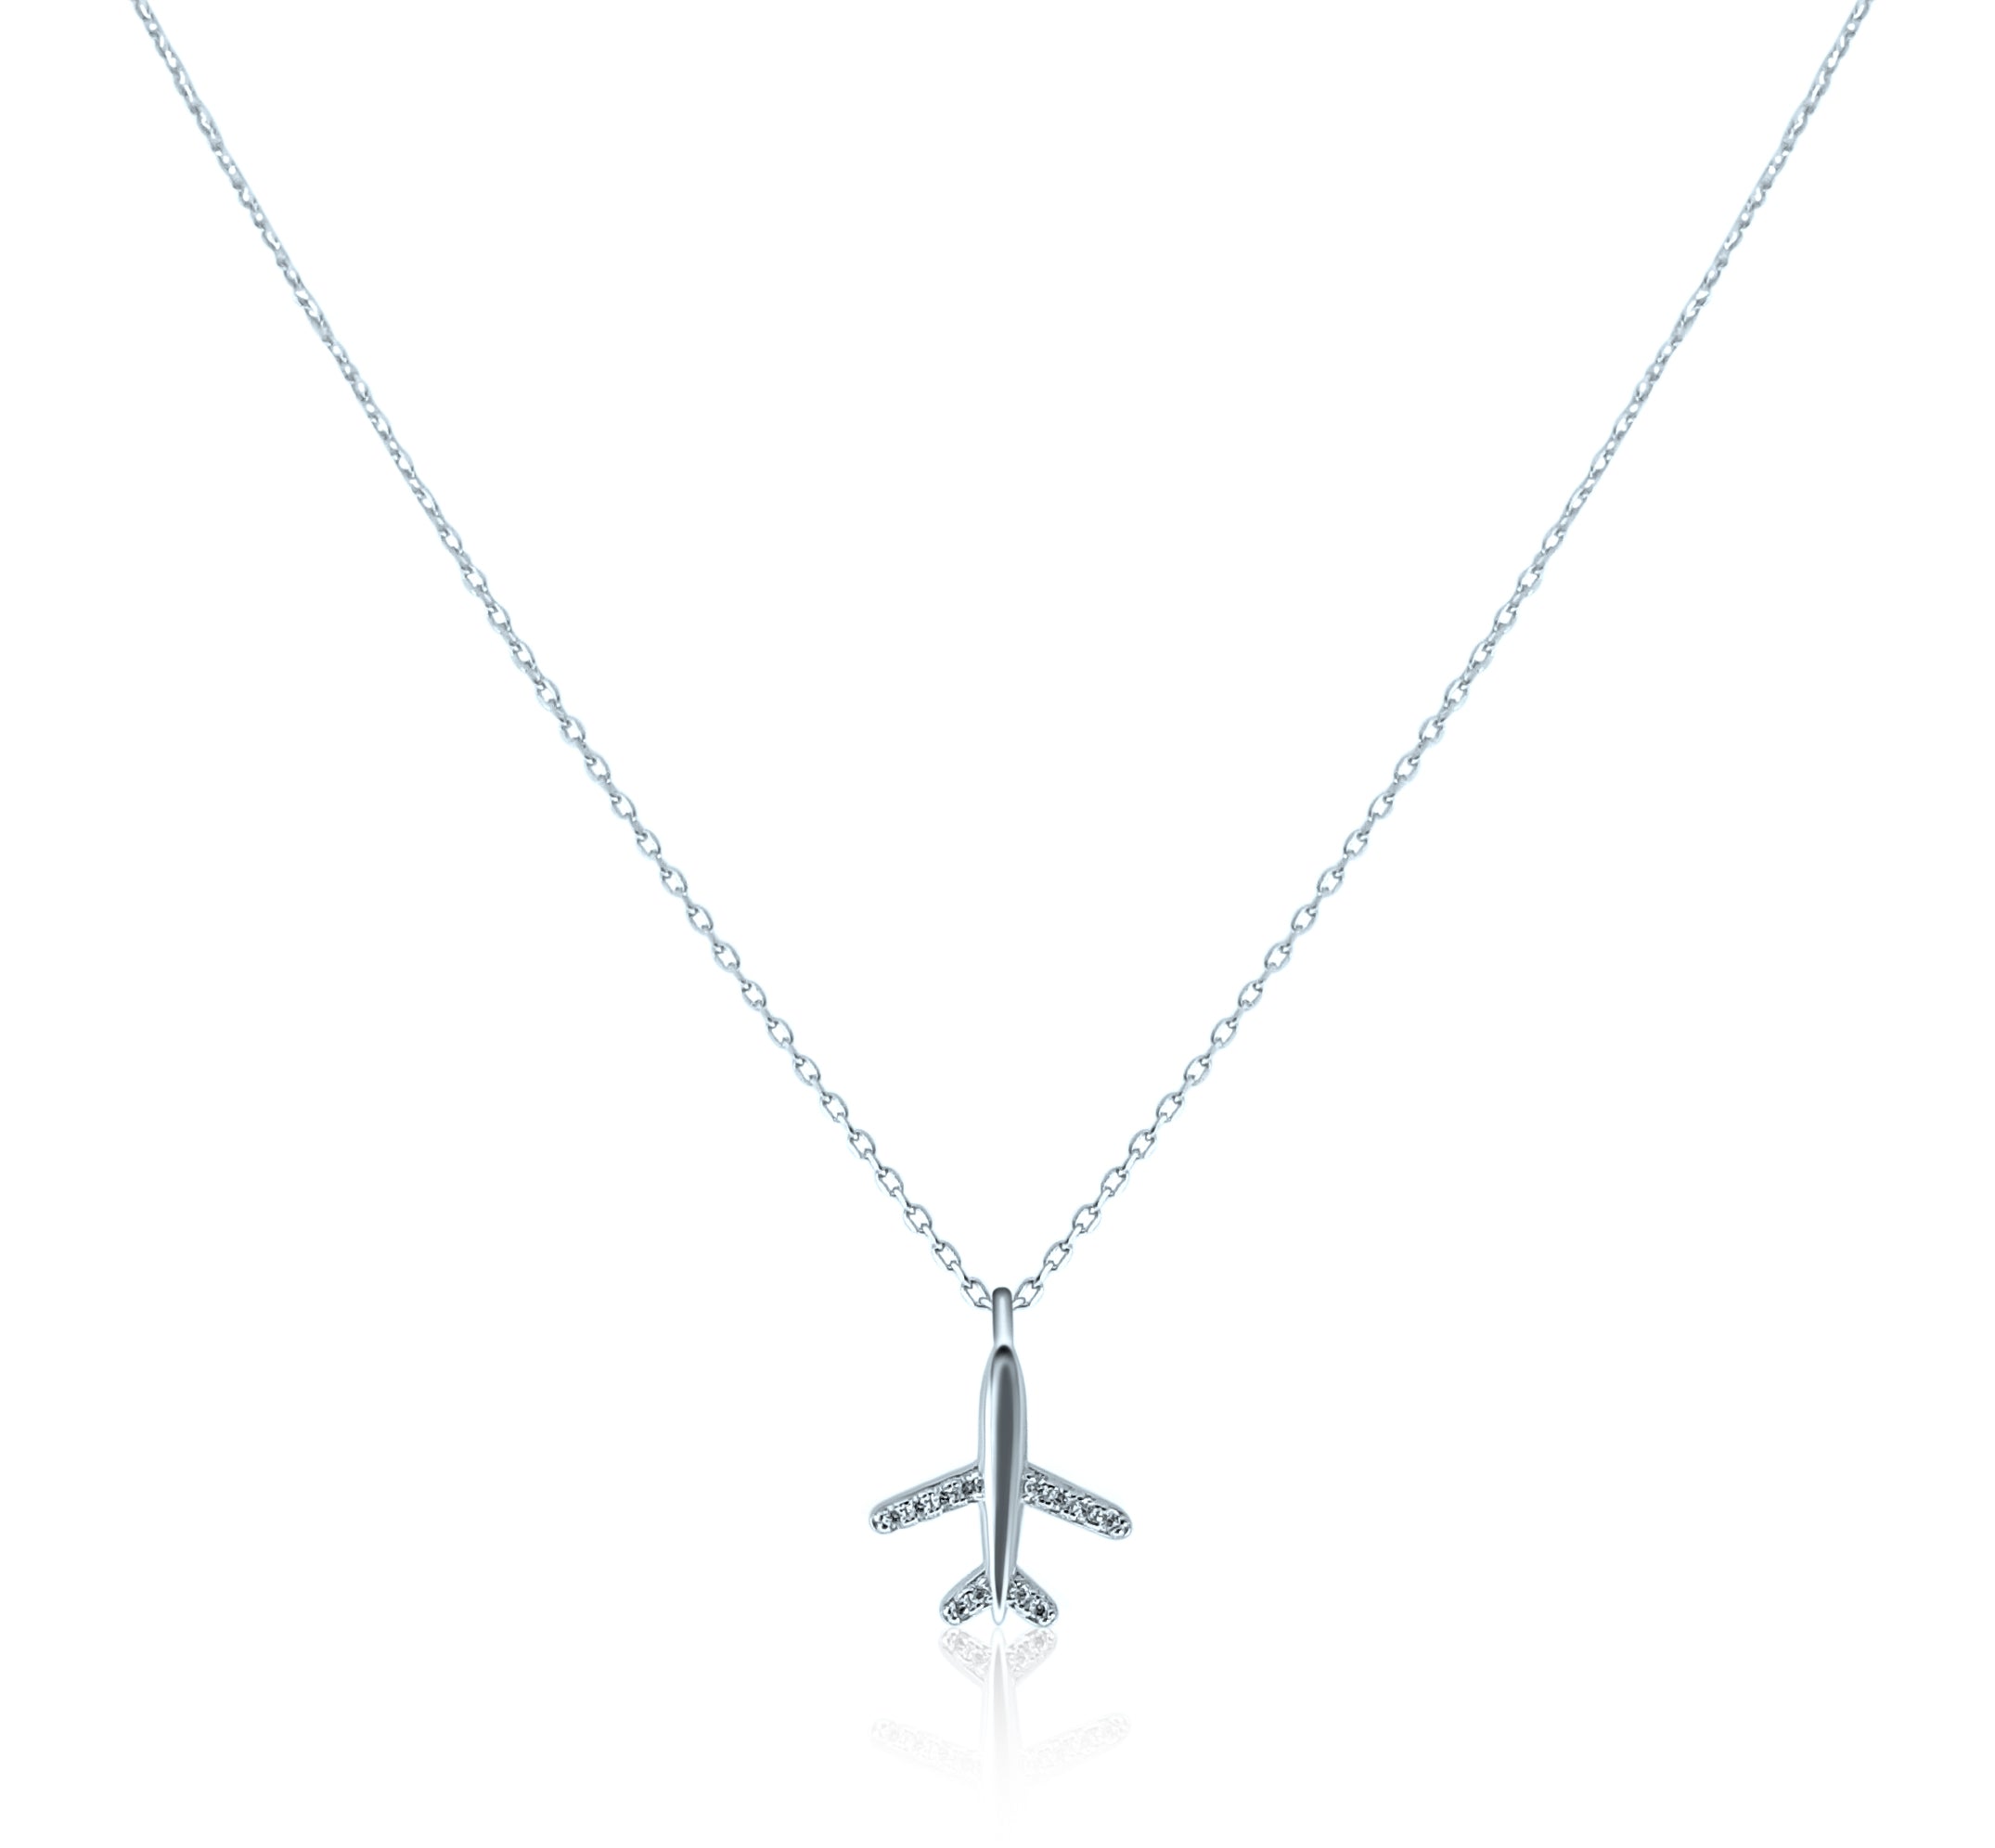 YAFEINI Airplane Necklace 925 Sterling Silver Flight Pendant Airplane  Jewelry for Women Girls